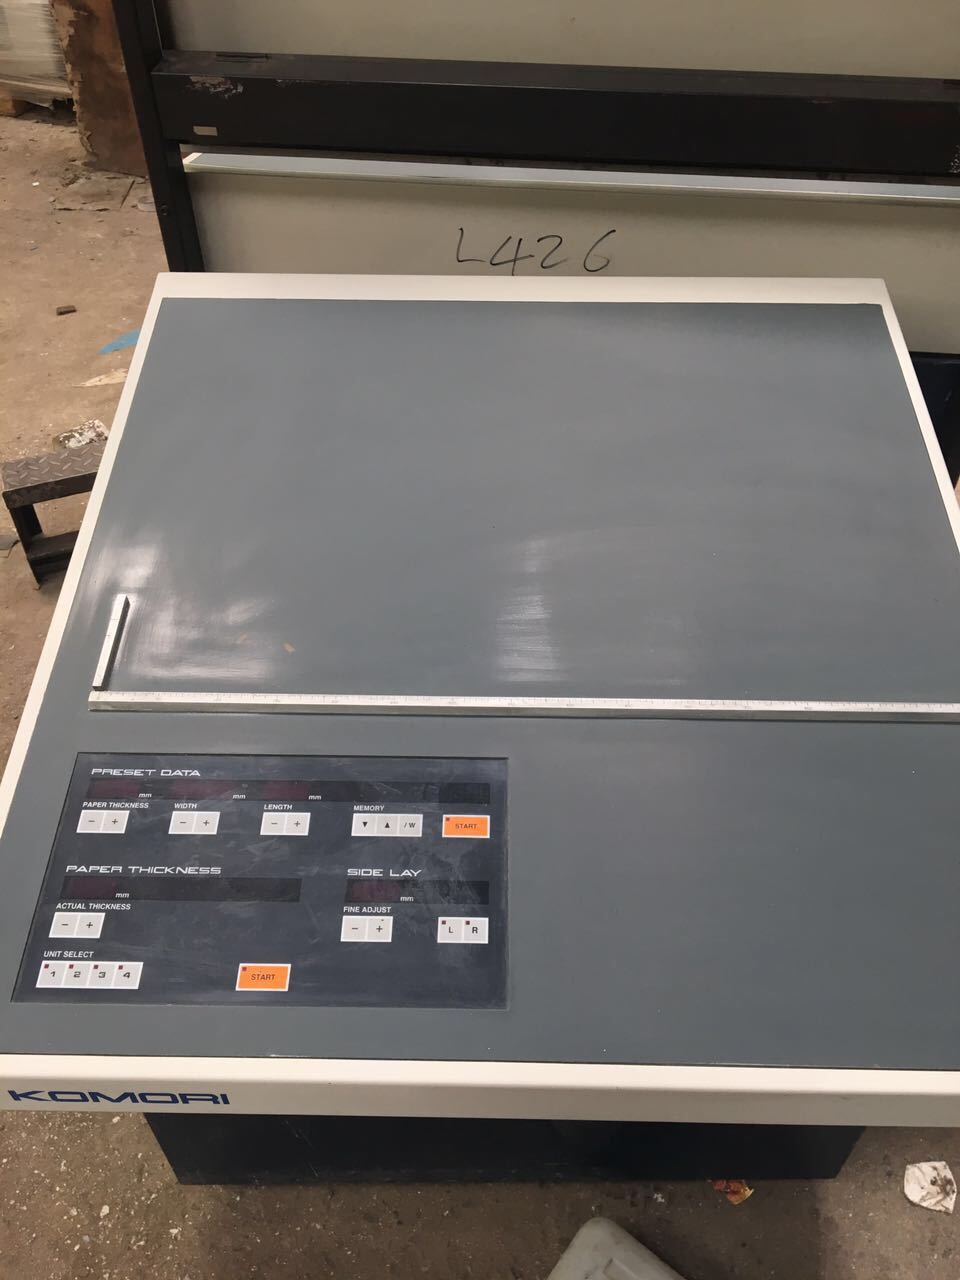 Komori Lithrone-L-426 Sheet Fed / Offset Used Machinery for sale